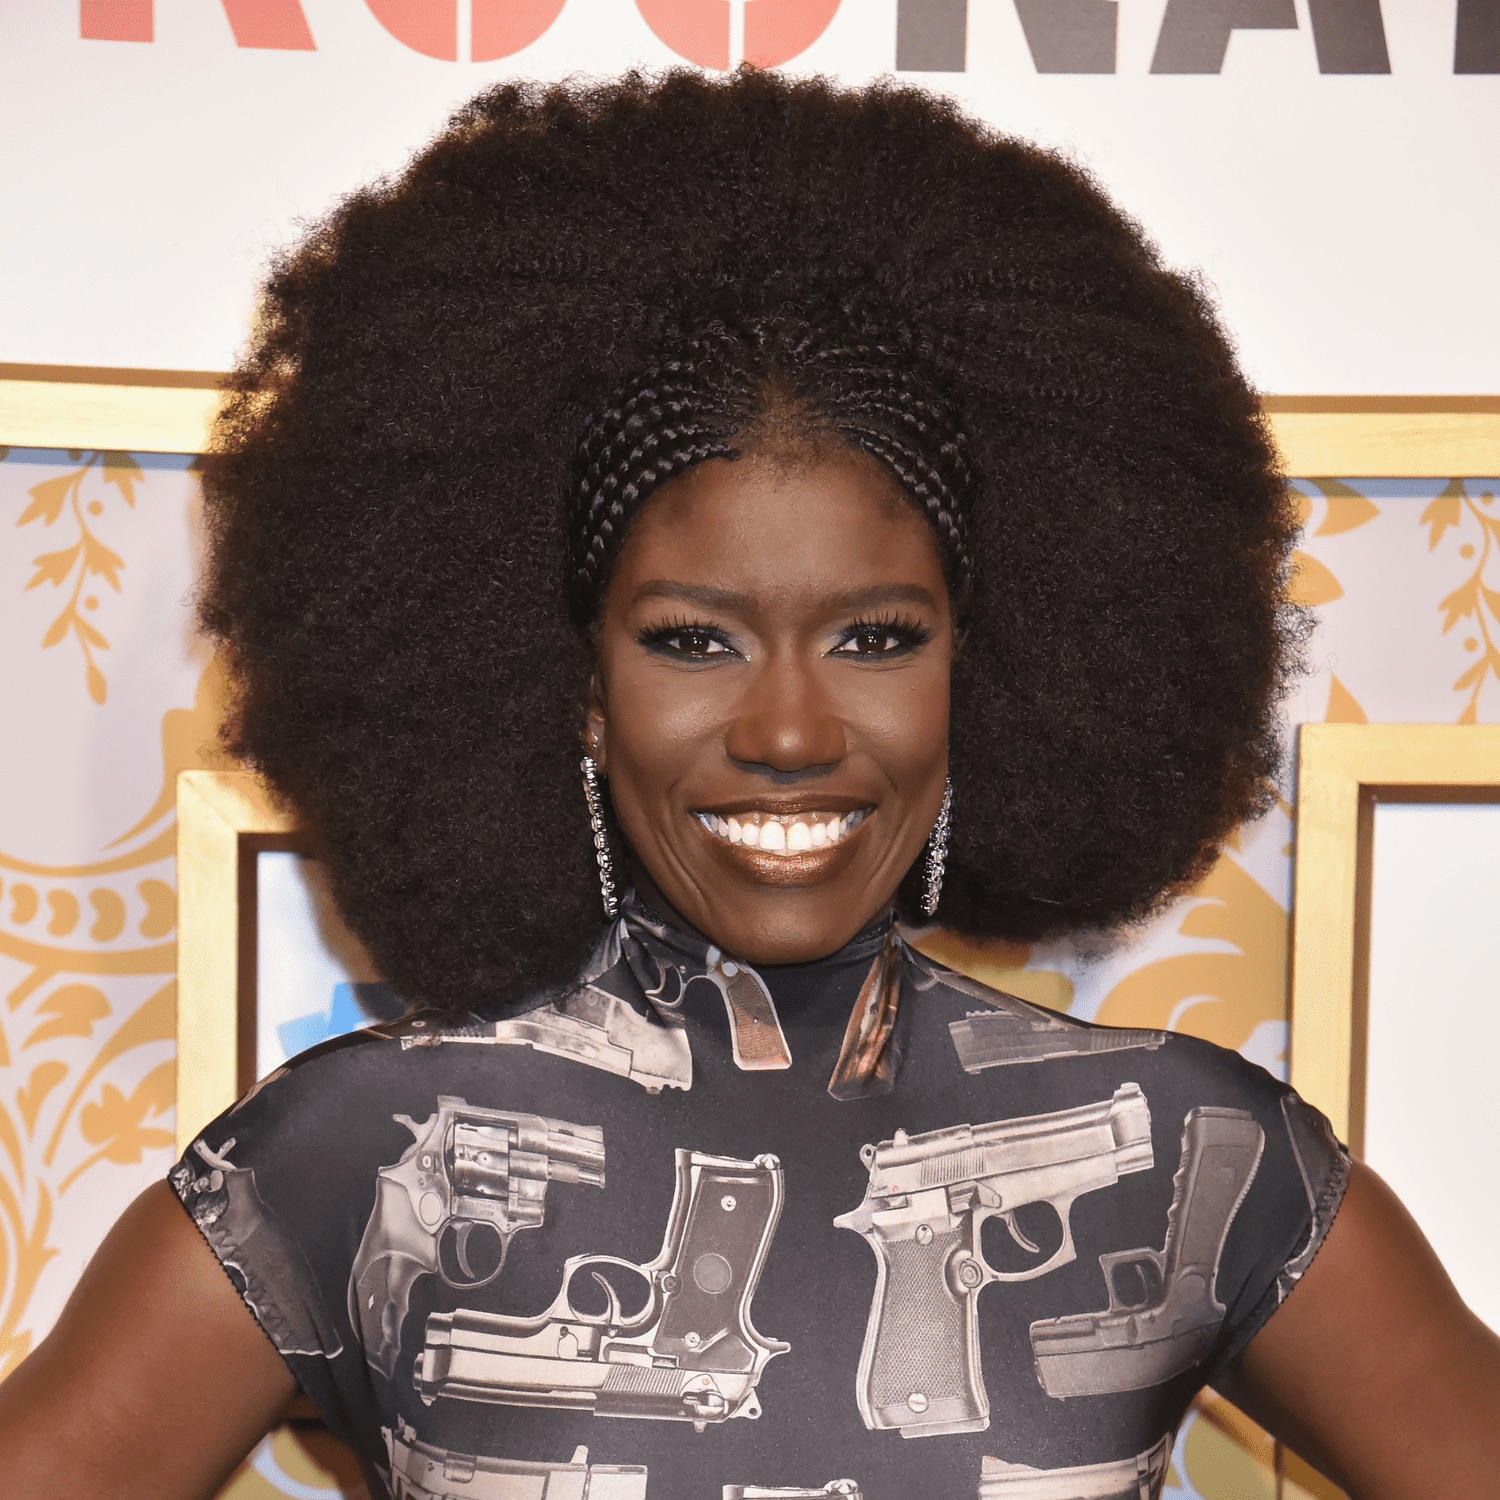 Bozoma Saint John wearing cornrows and an afro hairstyle